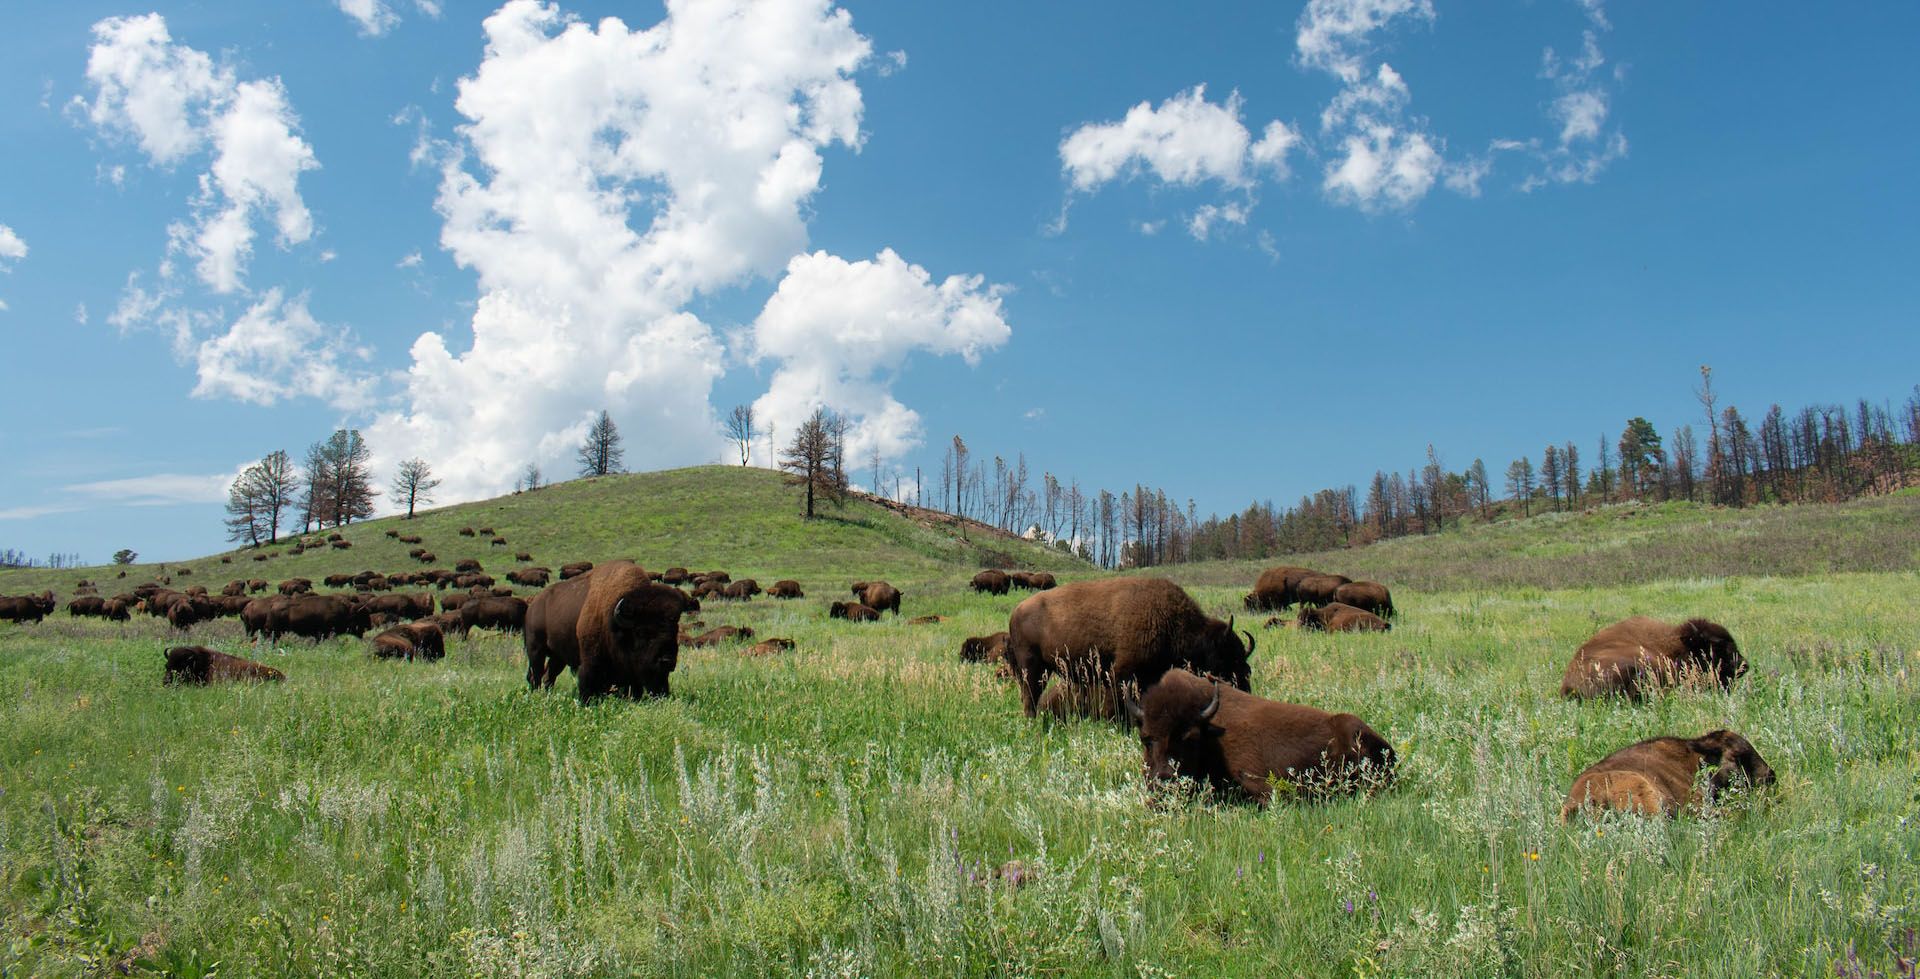 The largest herd of bison in Custer State Park on your ride on ROUVY